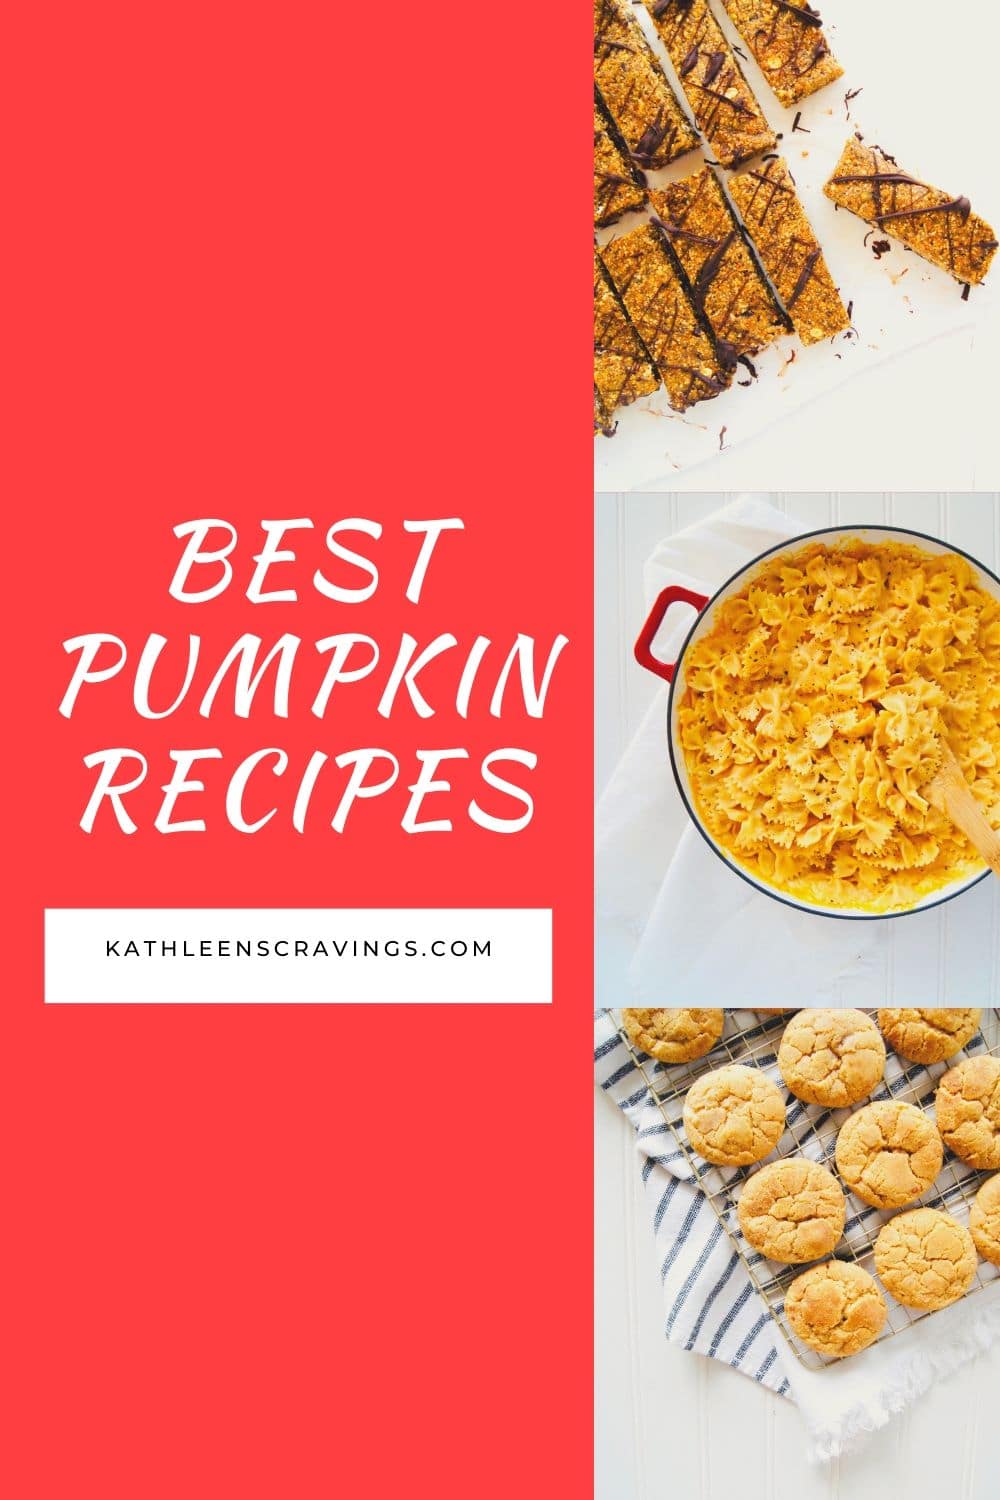 Best Pumpkin Recipes to use up your pumpkin puree! Lots of pumpkin ideas for your fall cooking and fall baking. KathleensCravings.com #pumpkin #pumpkinrecipes #pumpkinpuree #fallbaking #fallcooking